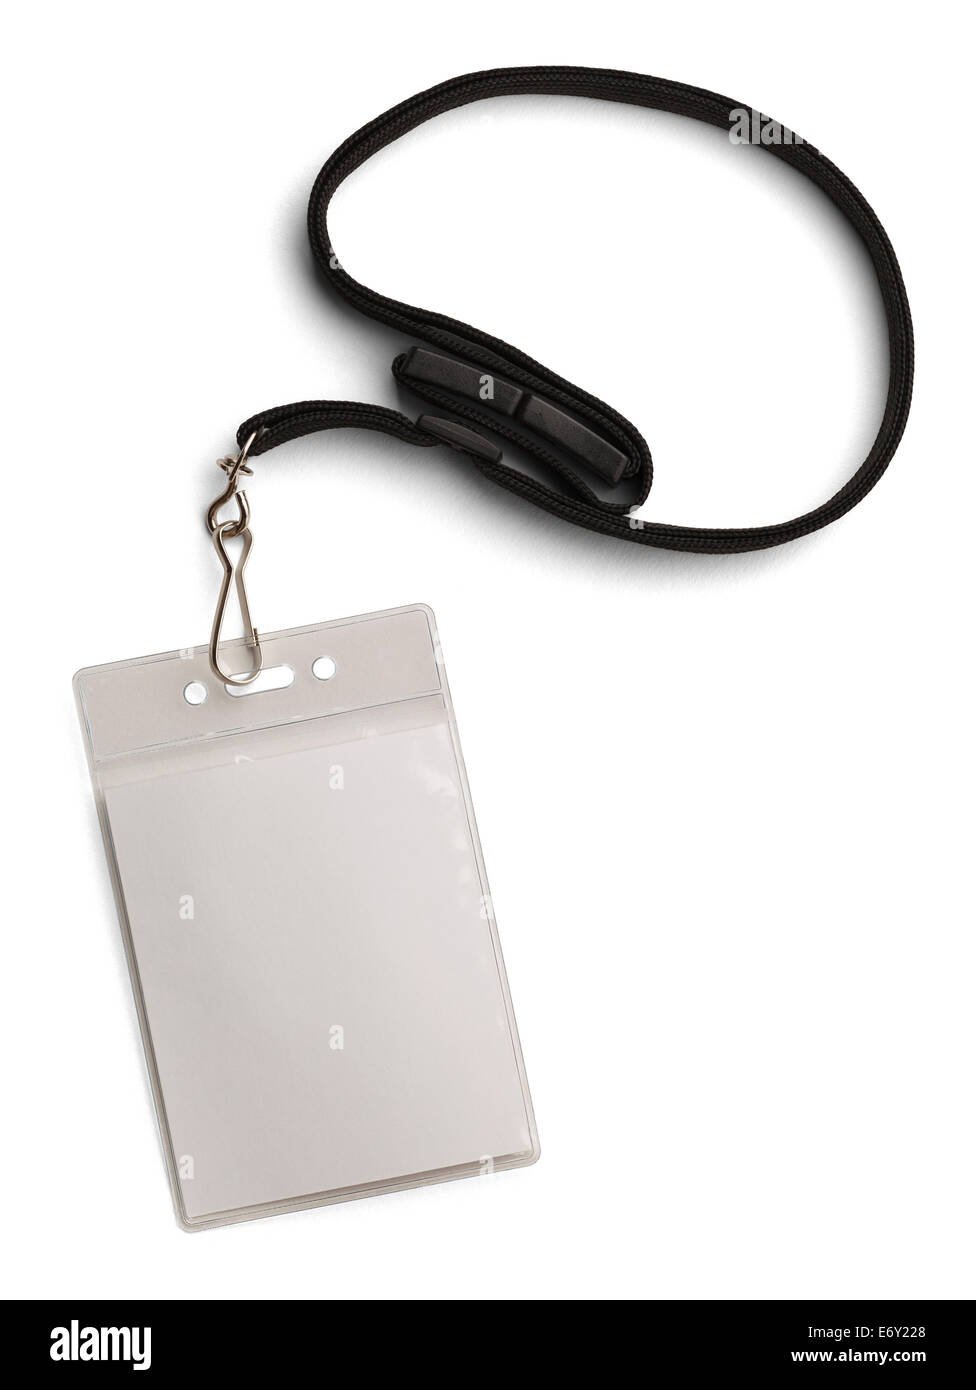 Blank Security Tag with Black Neck Band Isolated on White Background. Stock Photo